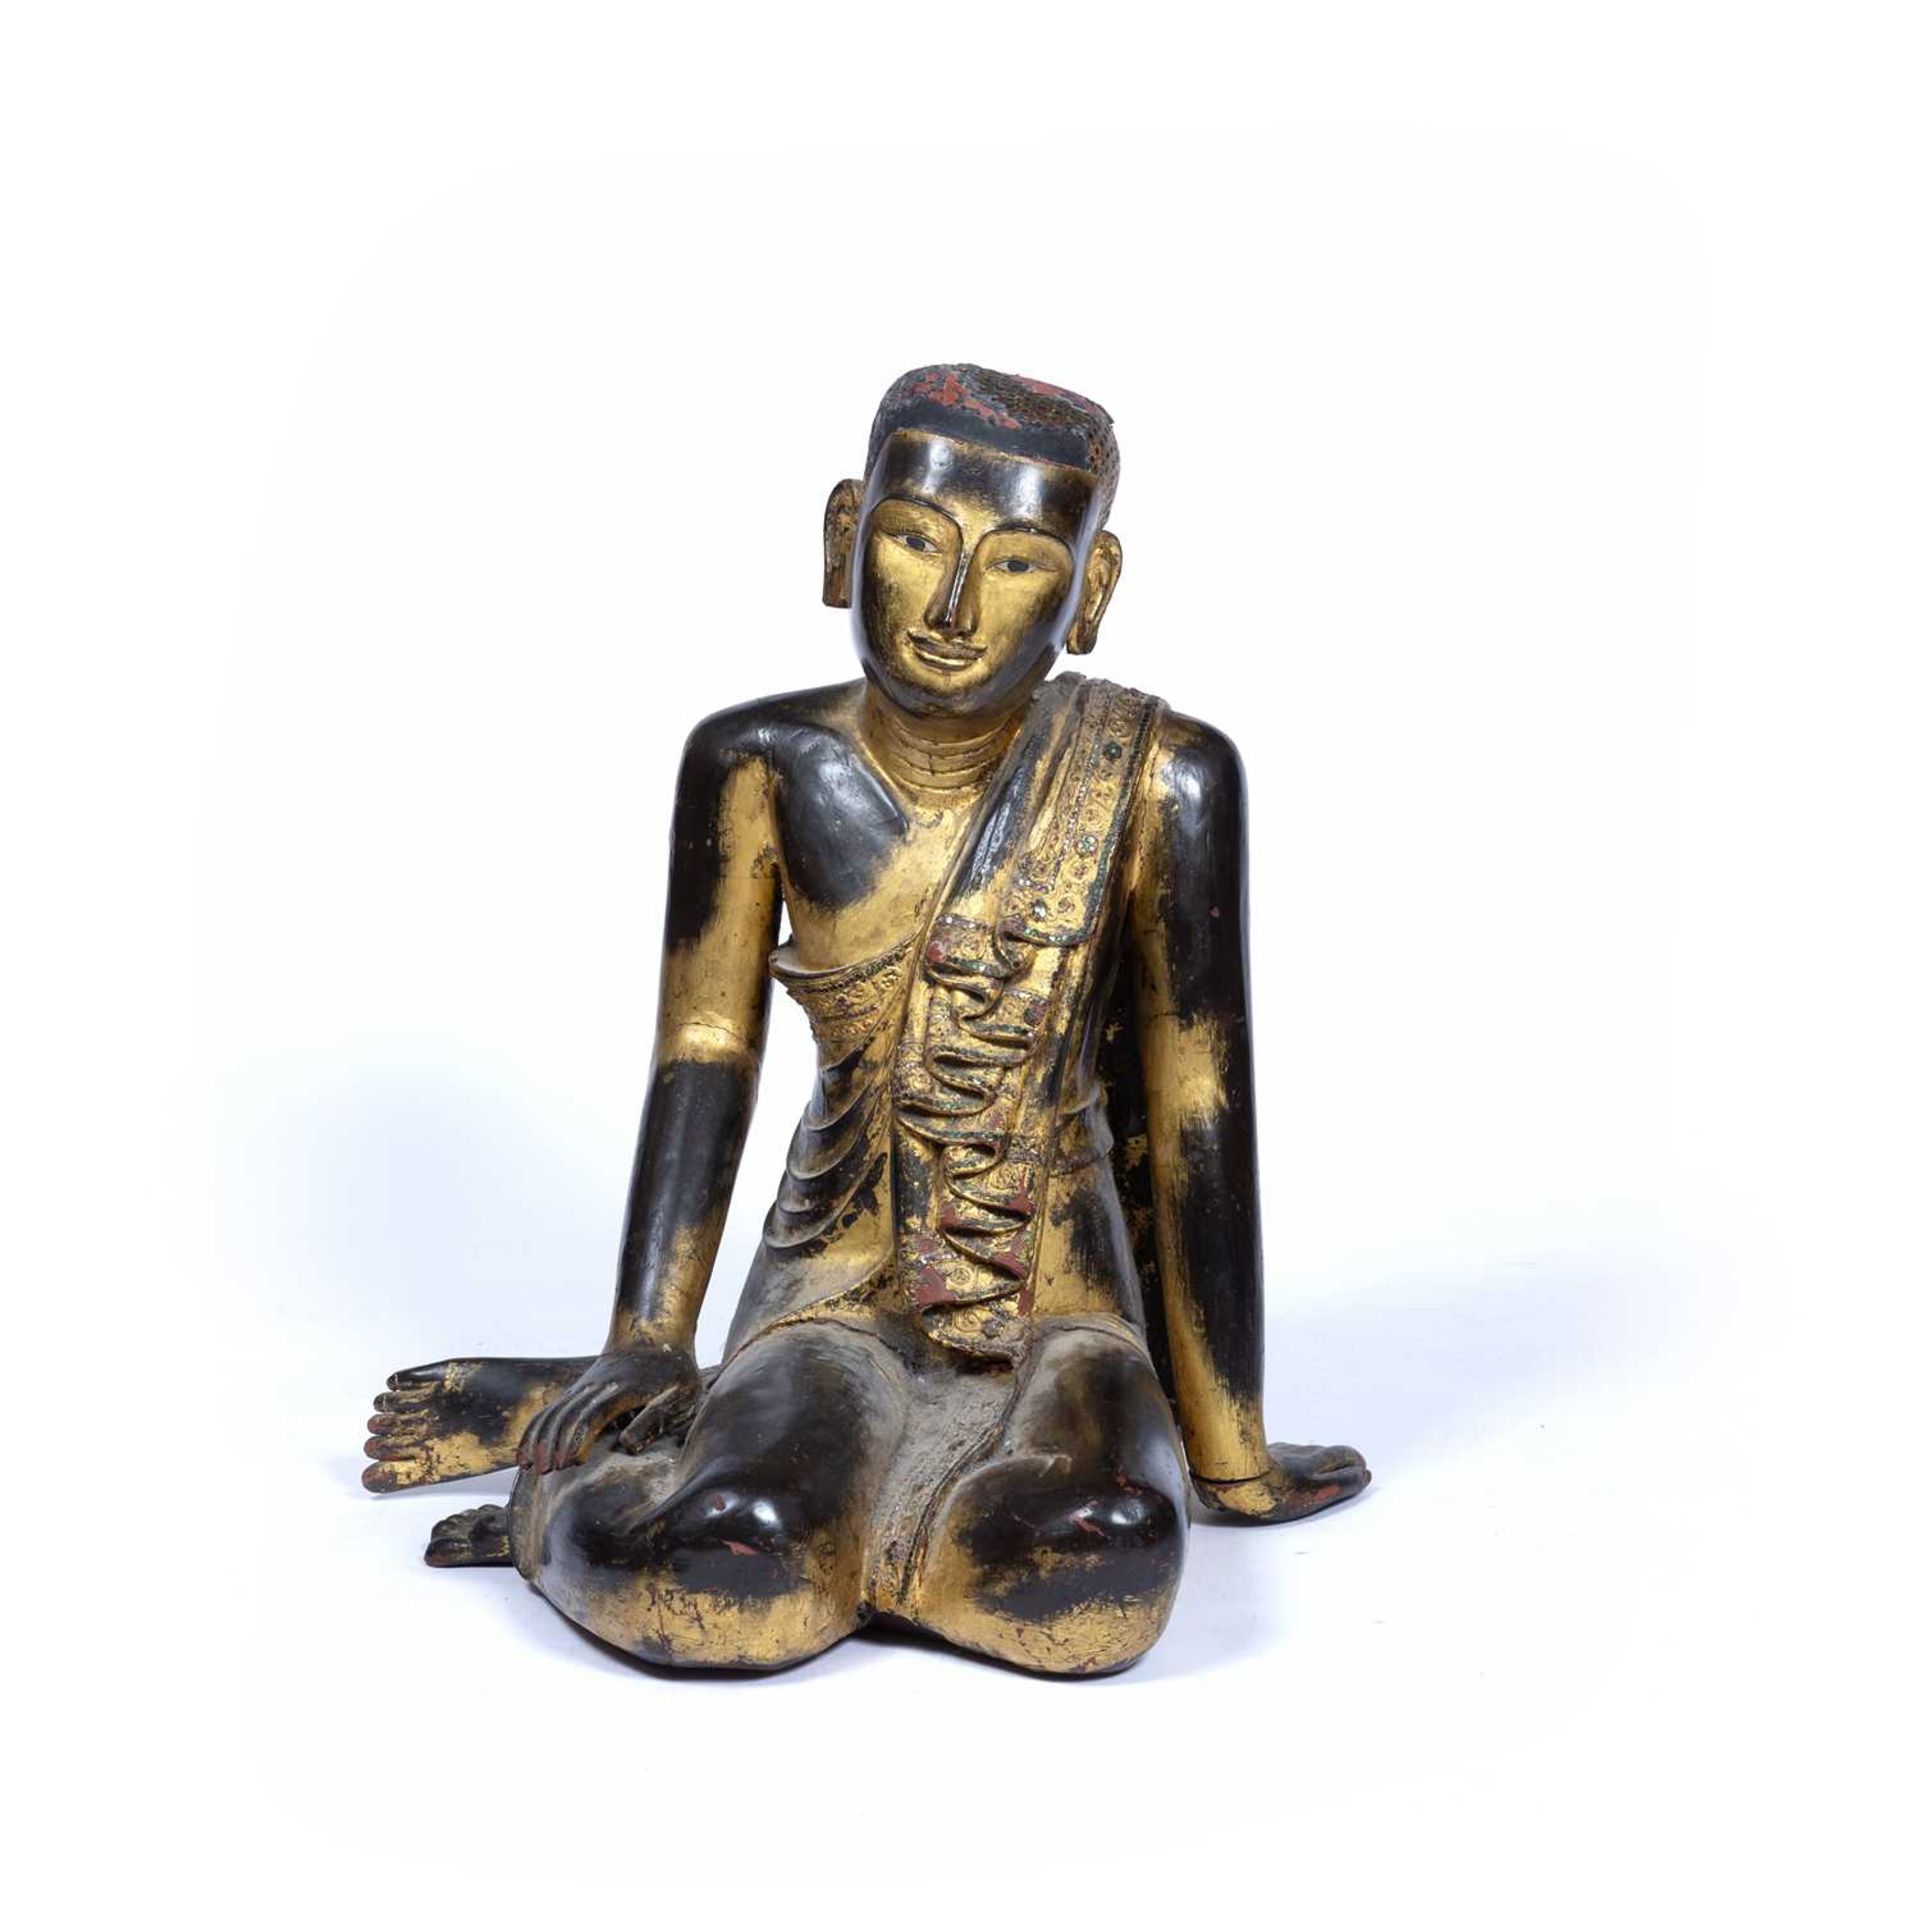 Wooden figure South East Asian, depicted seated with robes draped over one arm, with original traces